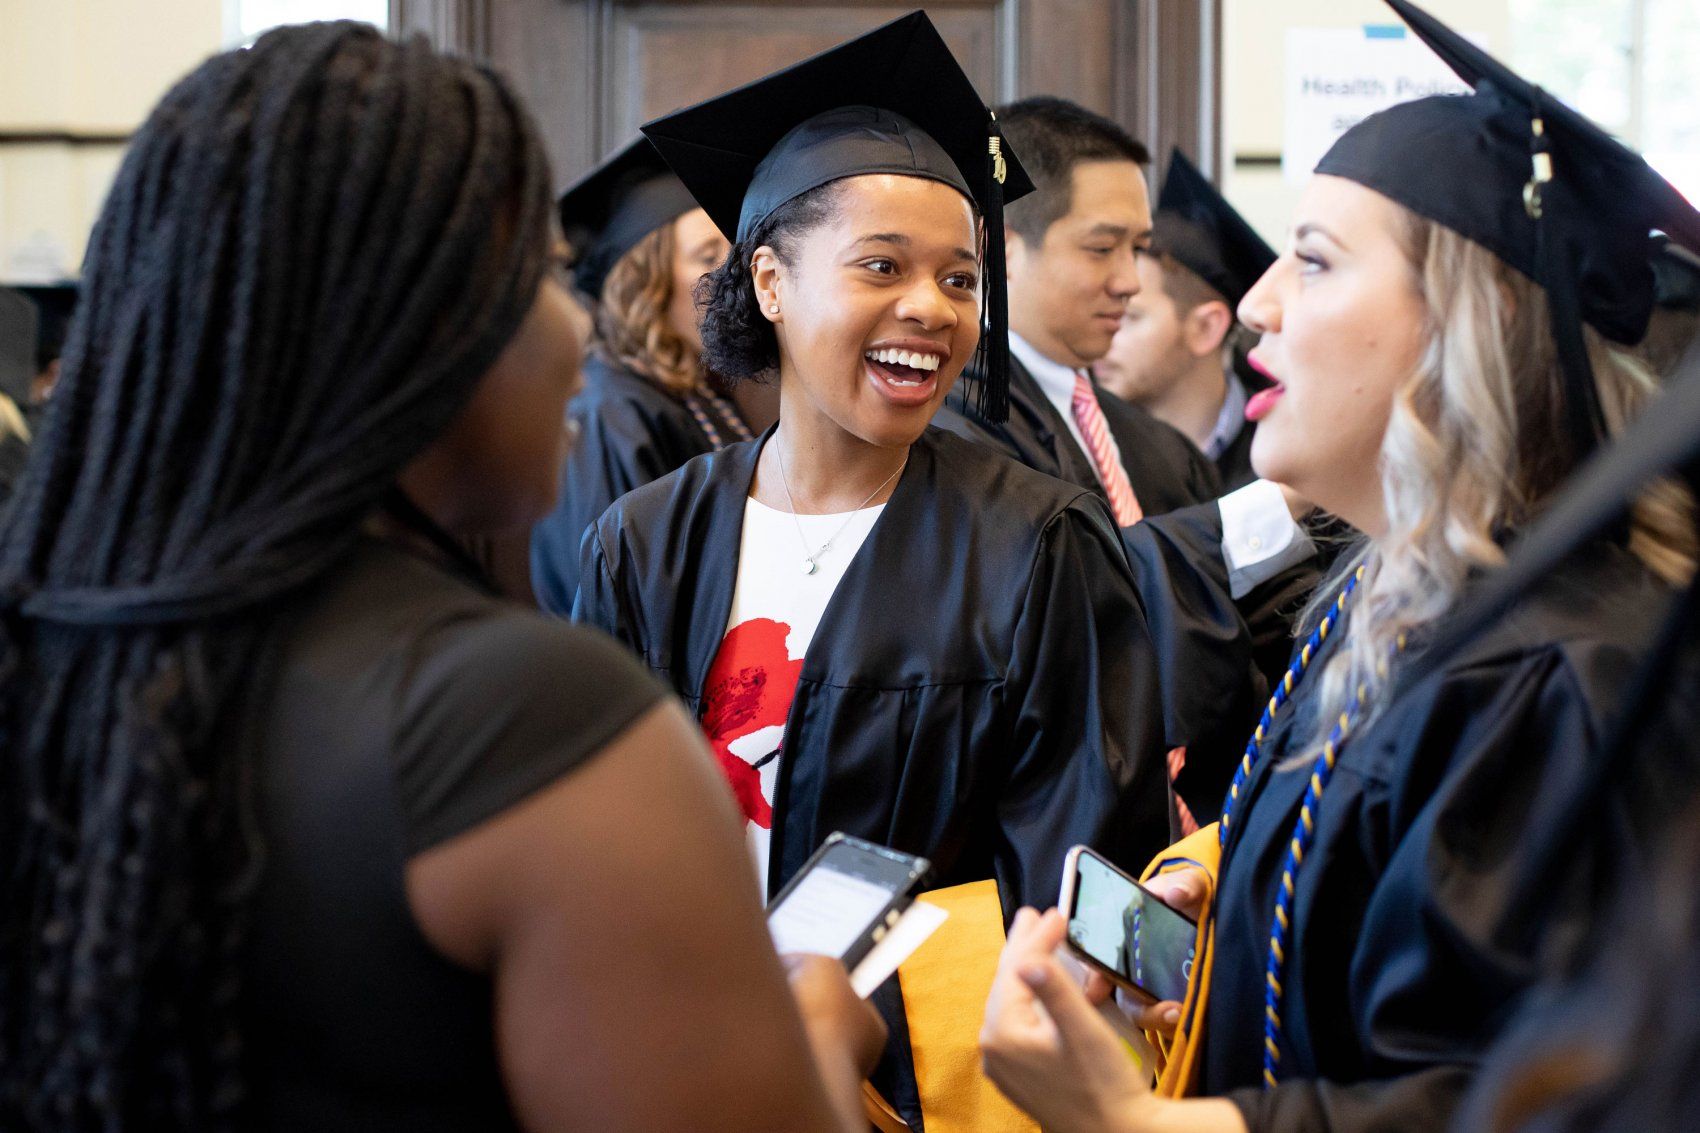 Students talking at Grad Div Commencement 2019